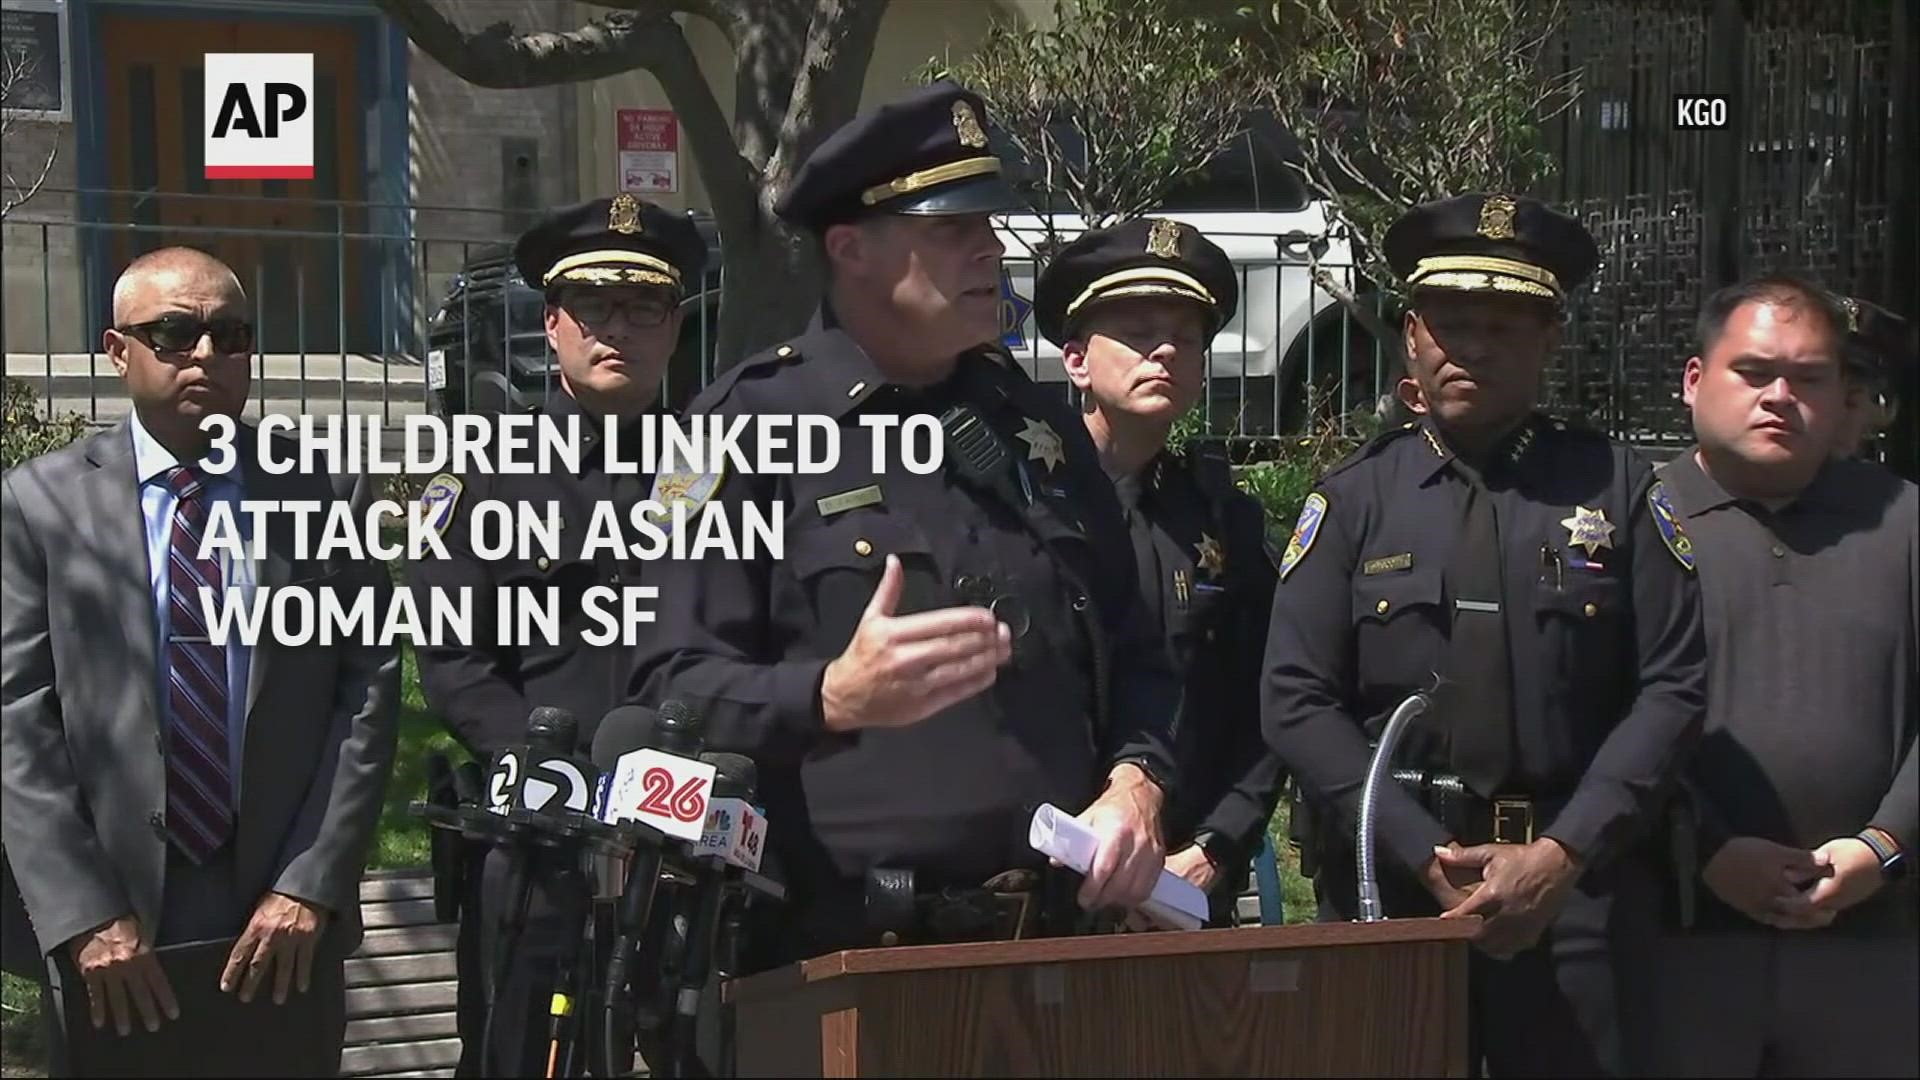 Police say three children ranging in age from 11 to 14 and an 18-year-old beat and robbed a 70-year-old Asian woman who was attacked in San Francisco last month.